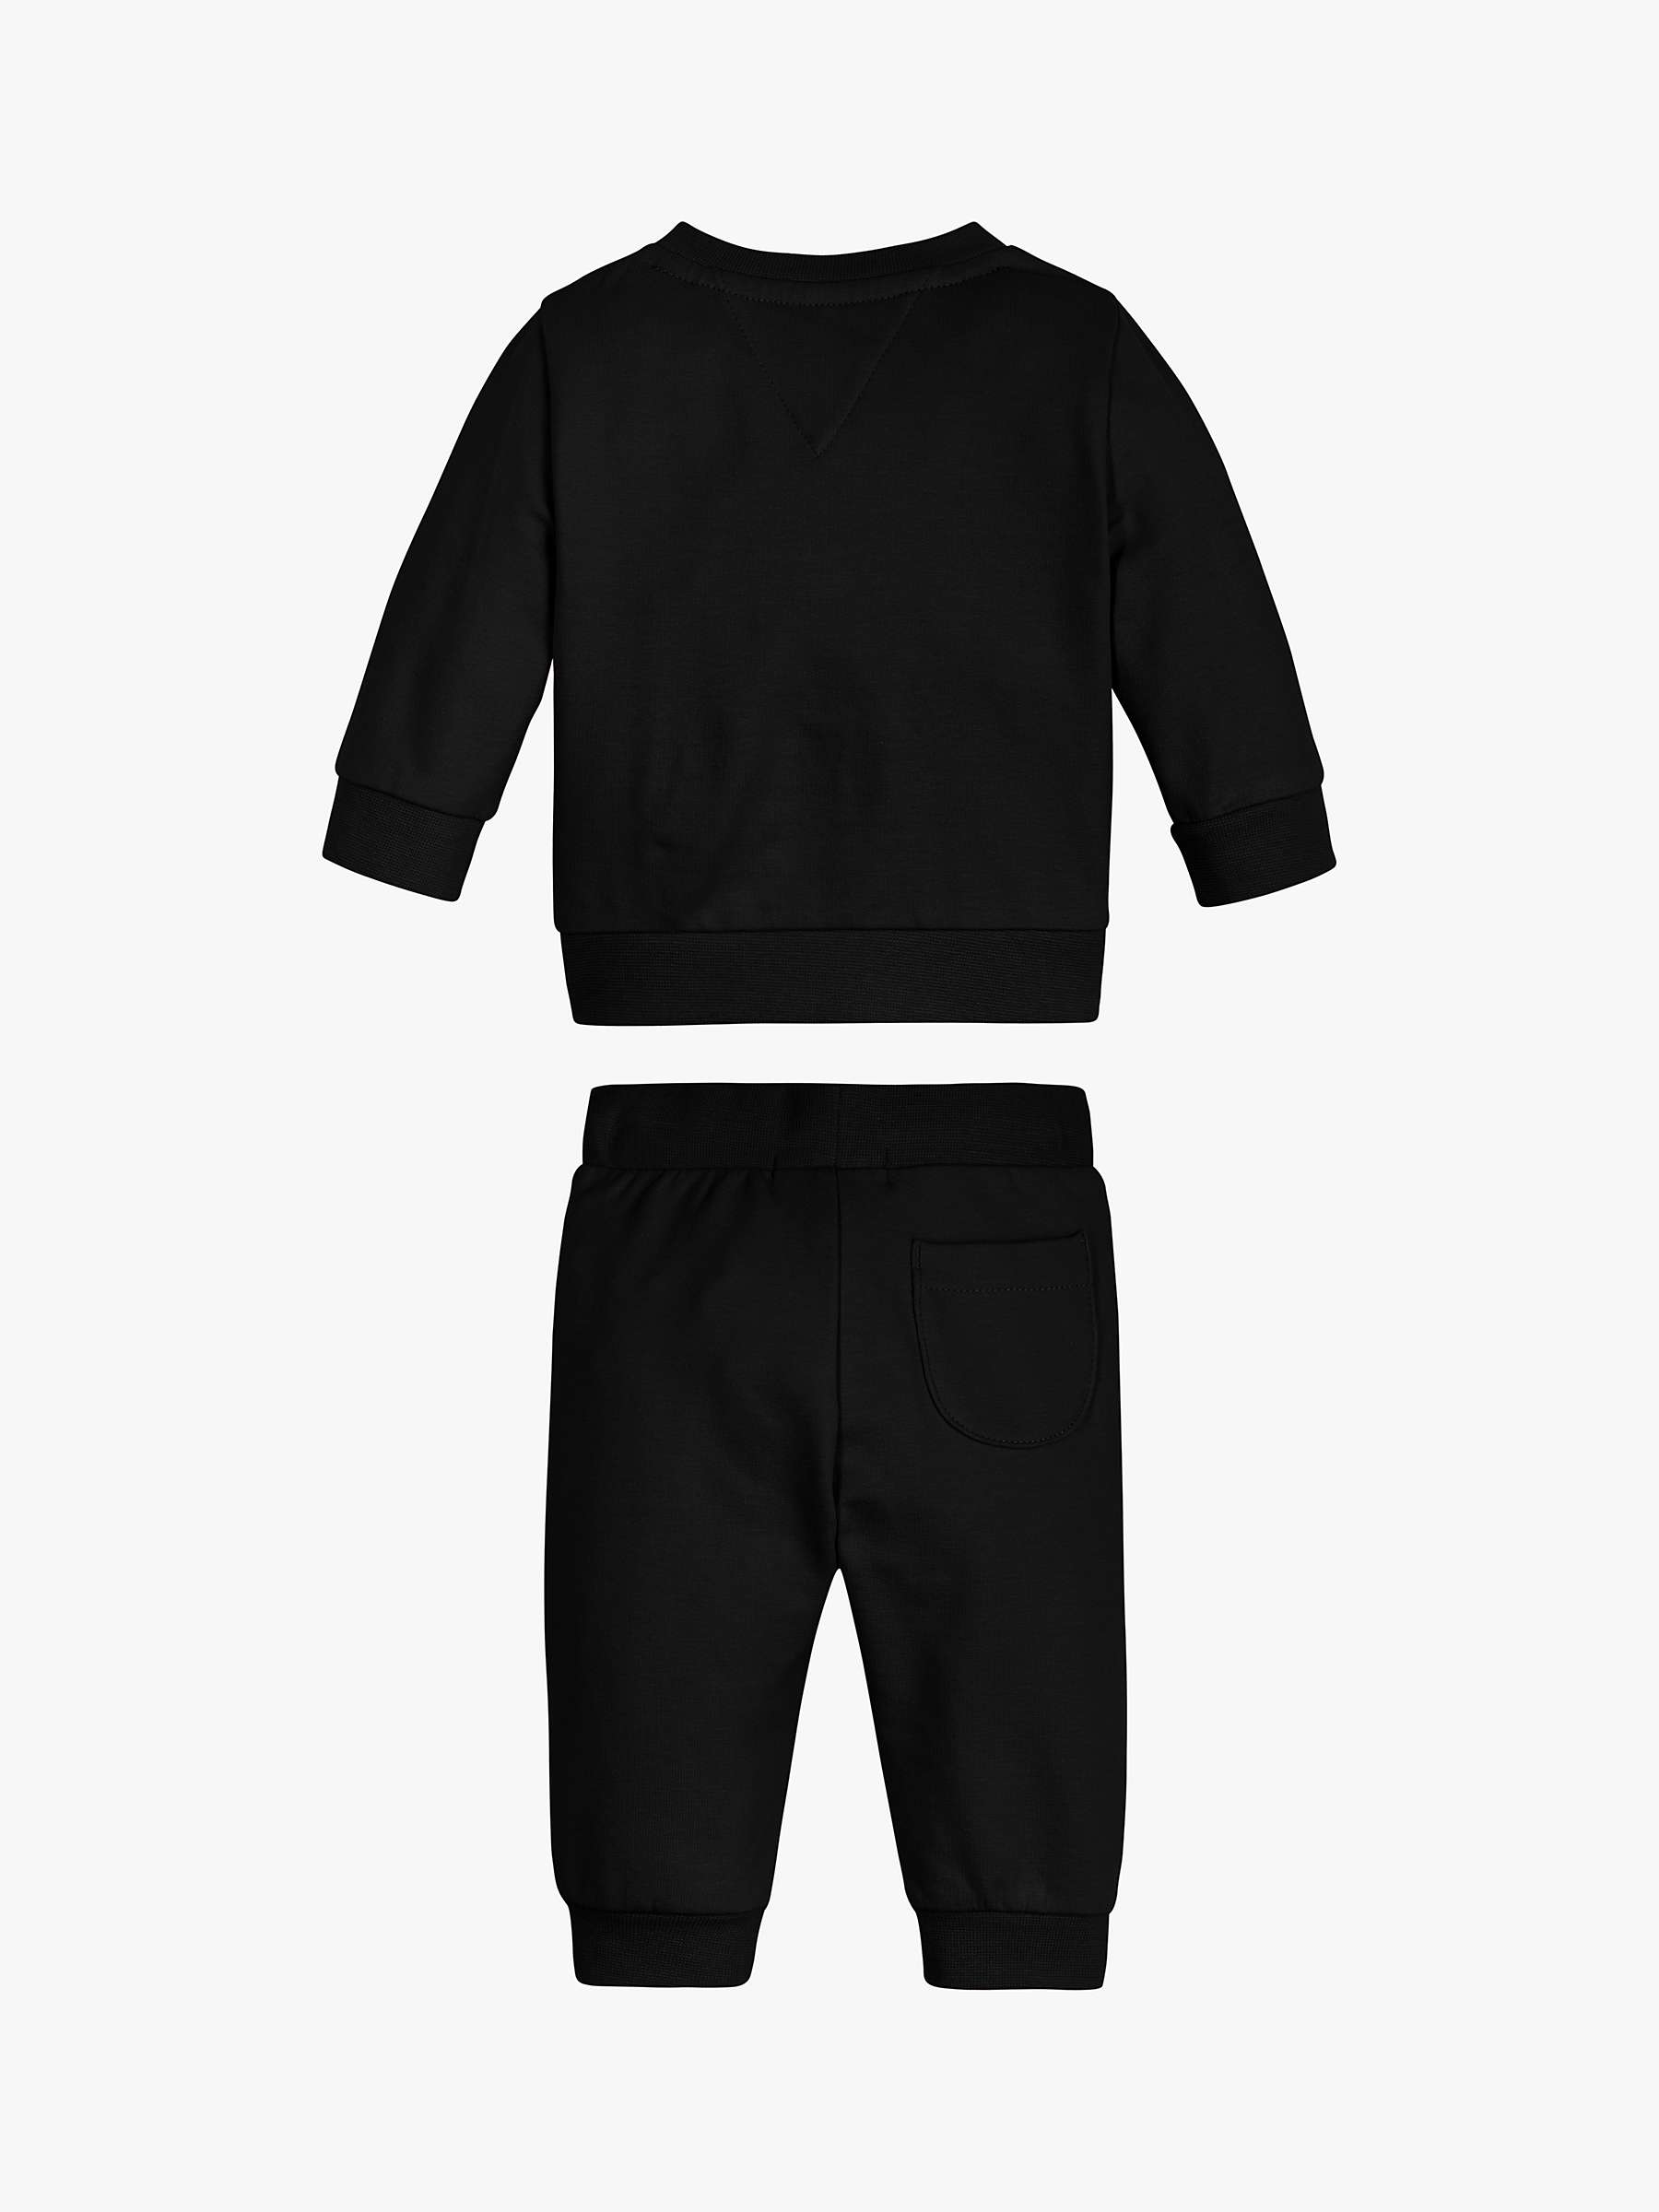 Buy Tommy Hilfiger Baby Essential Logo Crew Neck Sweatshirt and Joggers Set Online at johnlewis.com